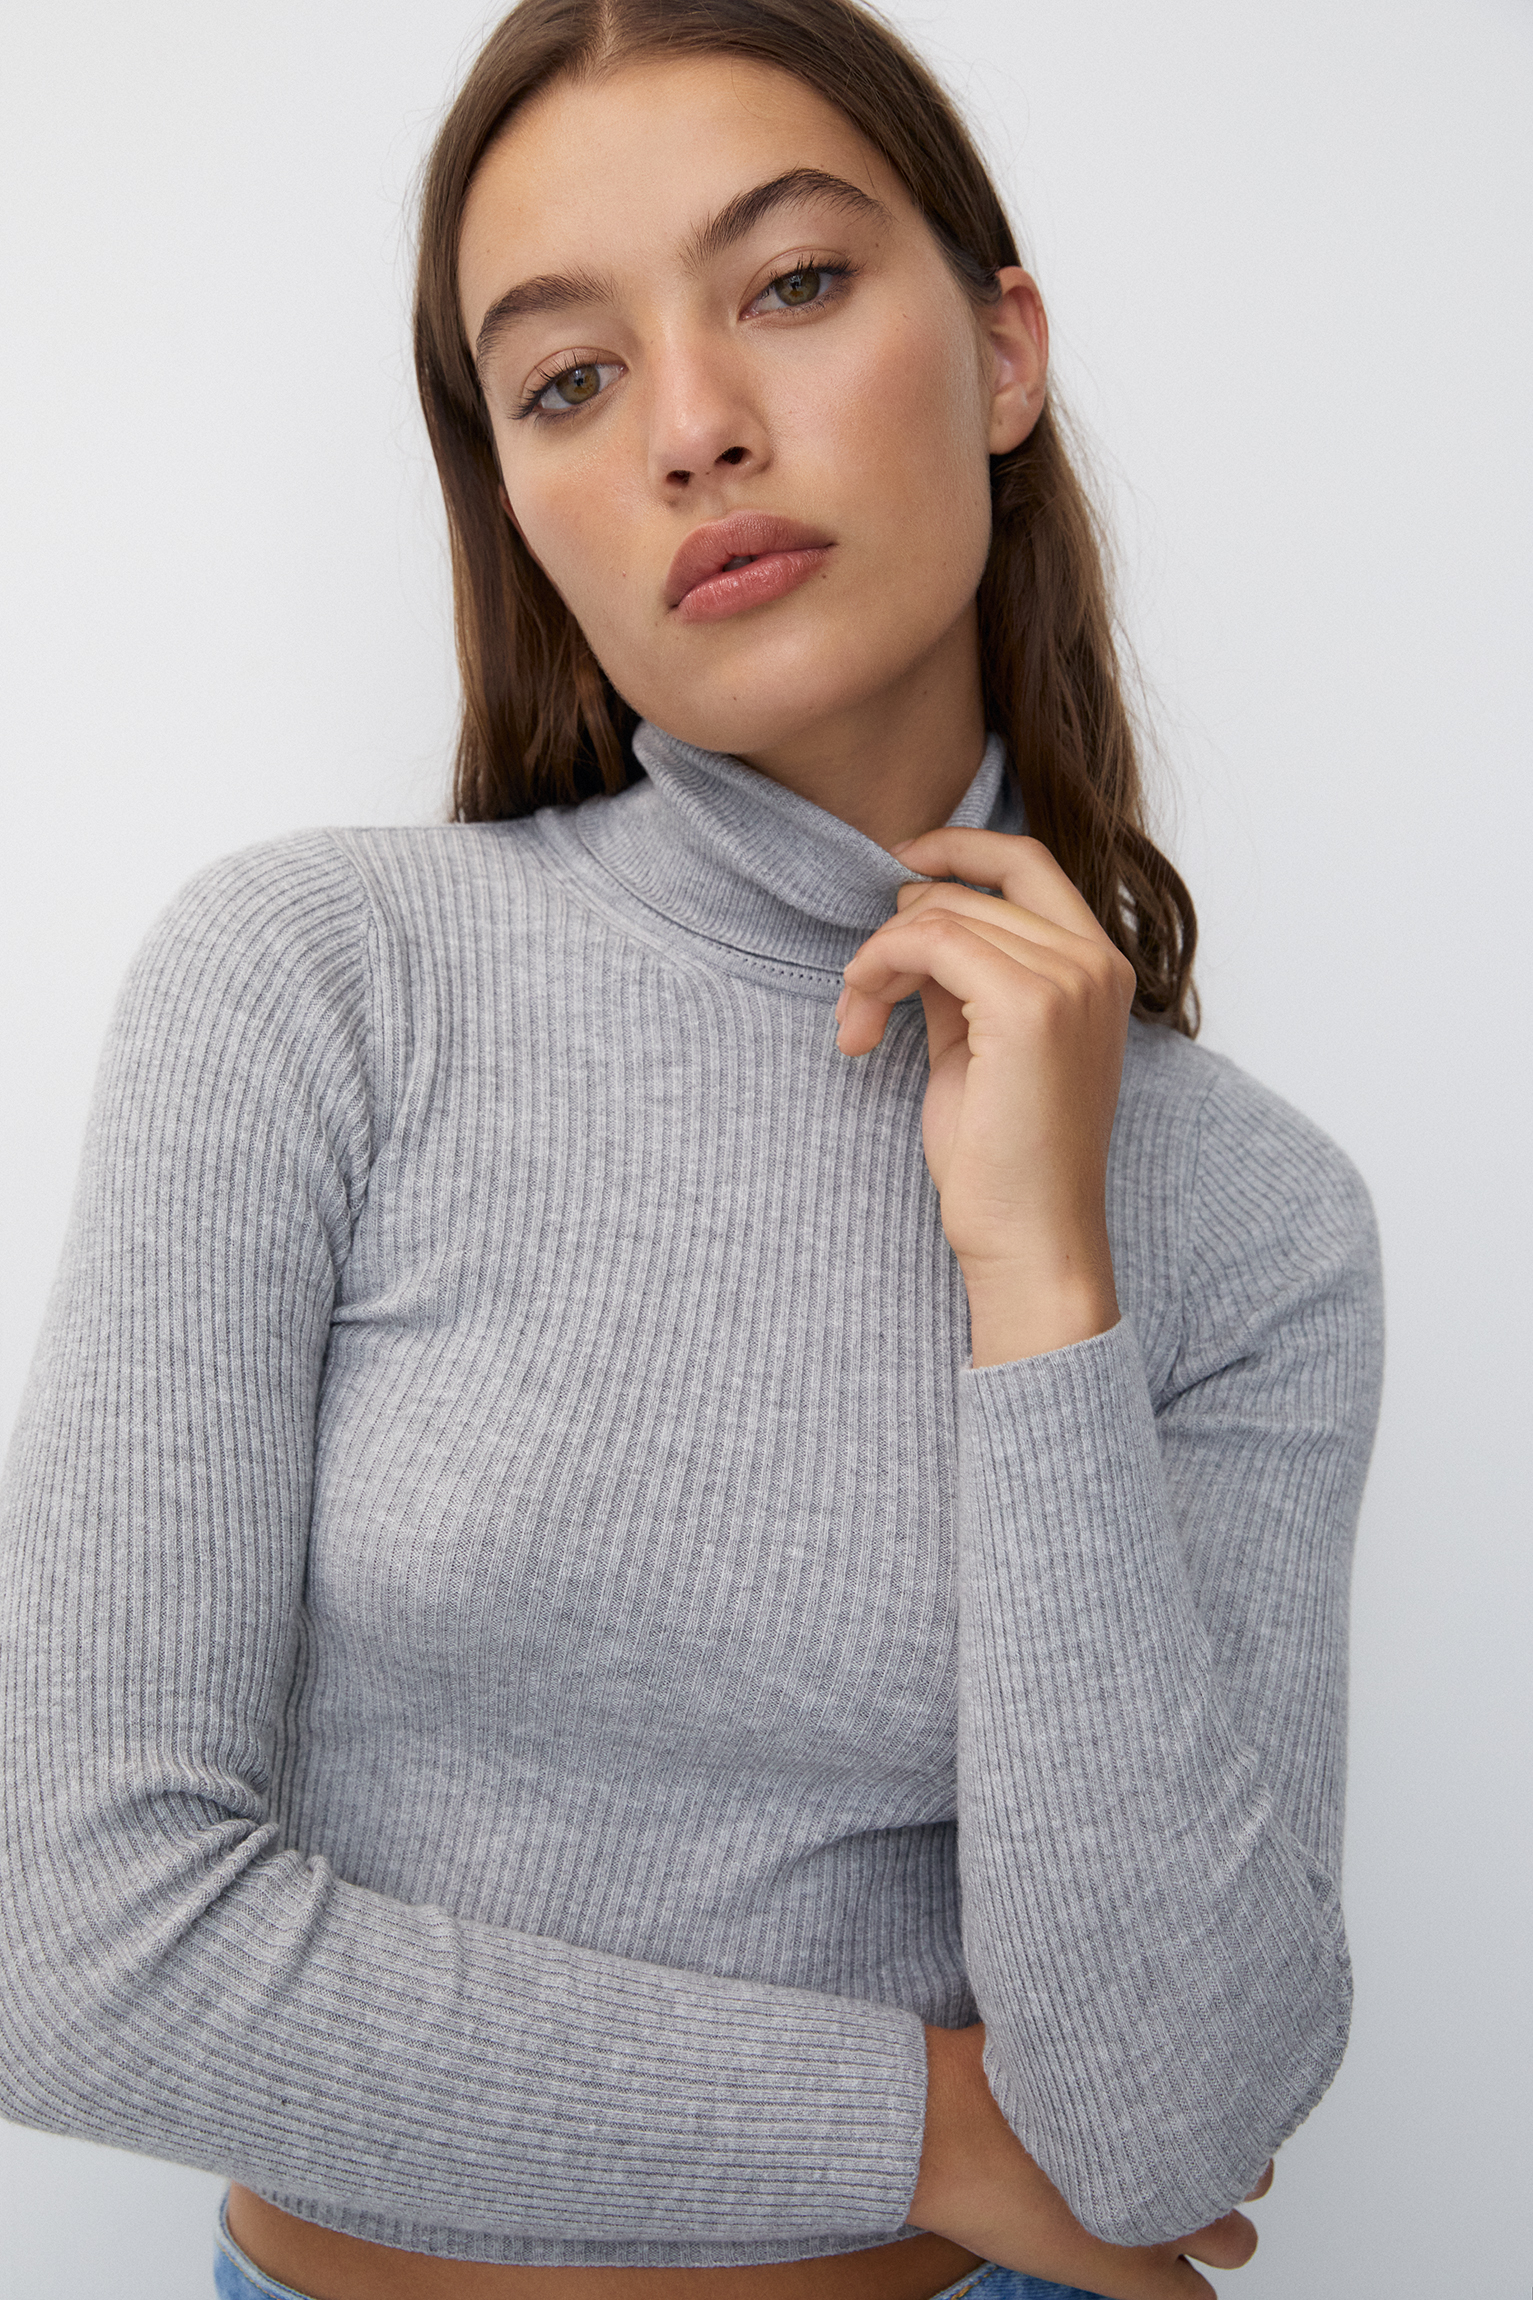 High neck knit sweater - pull&bear